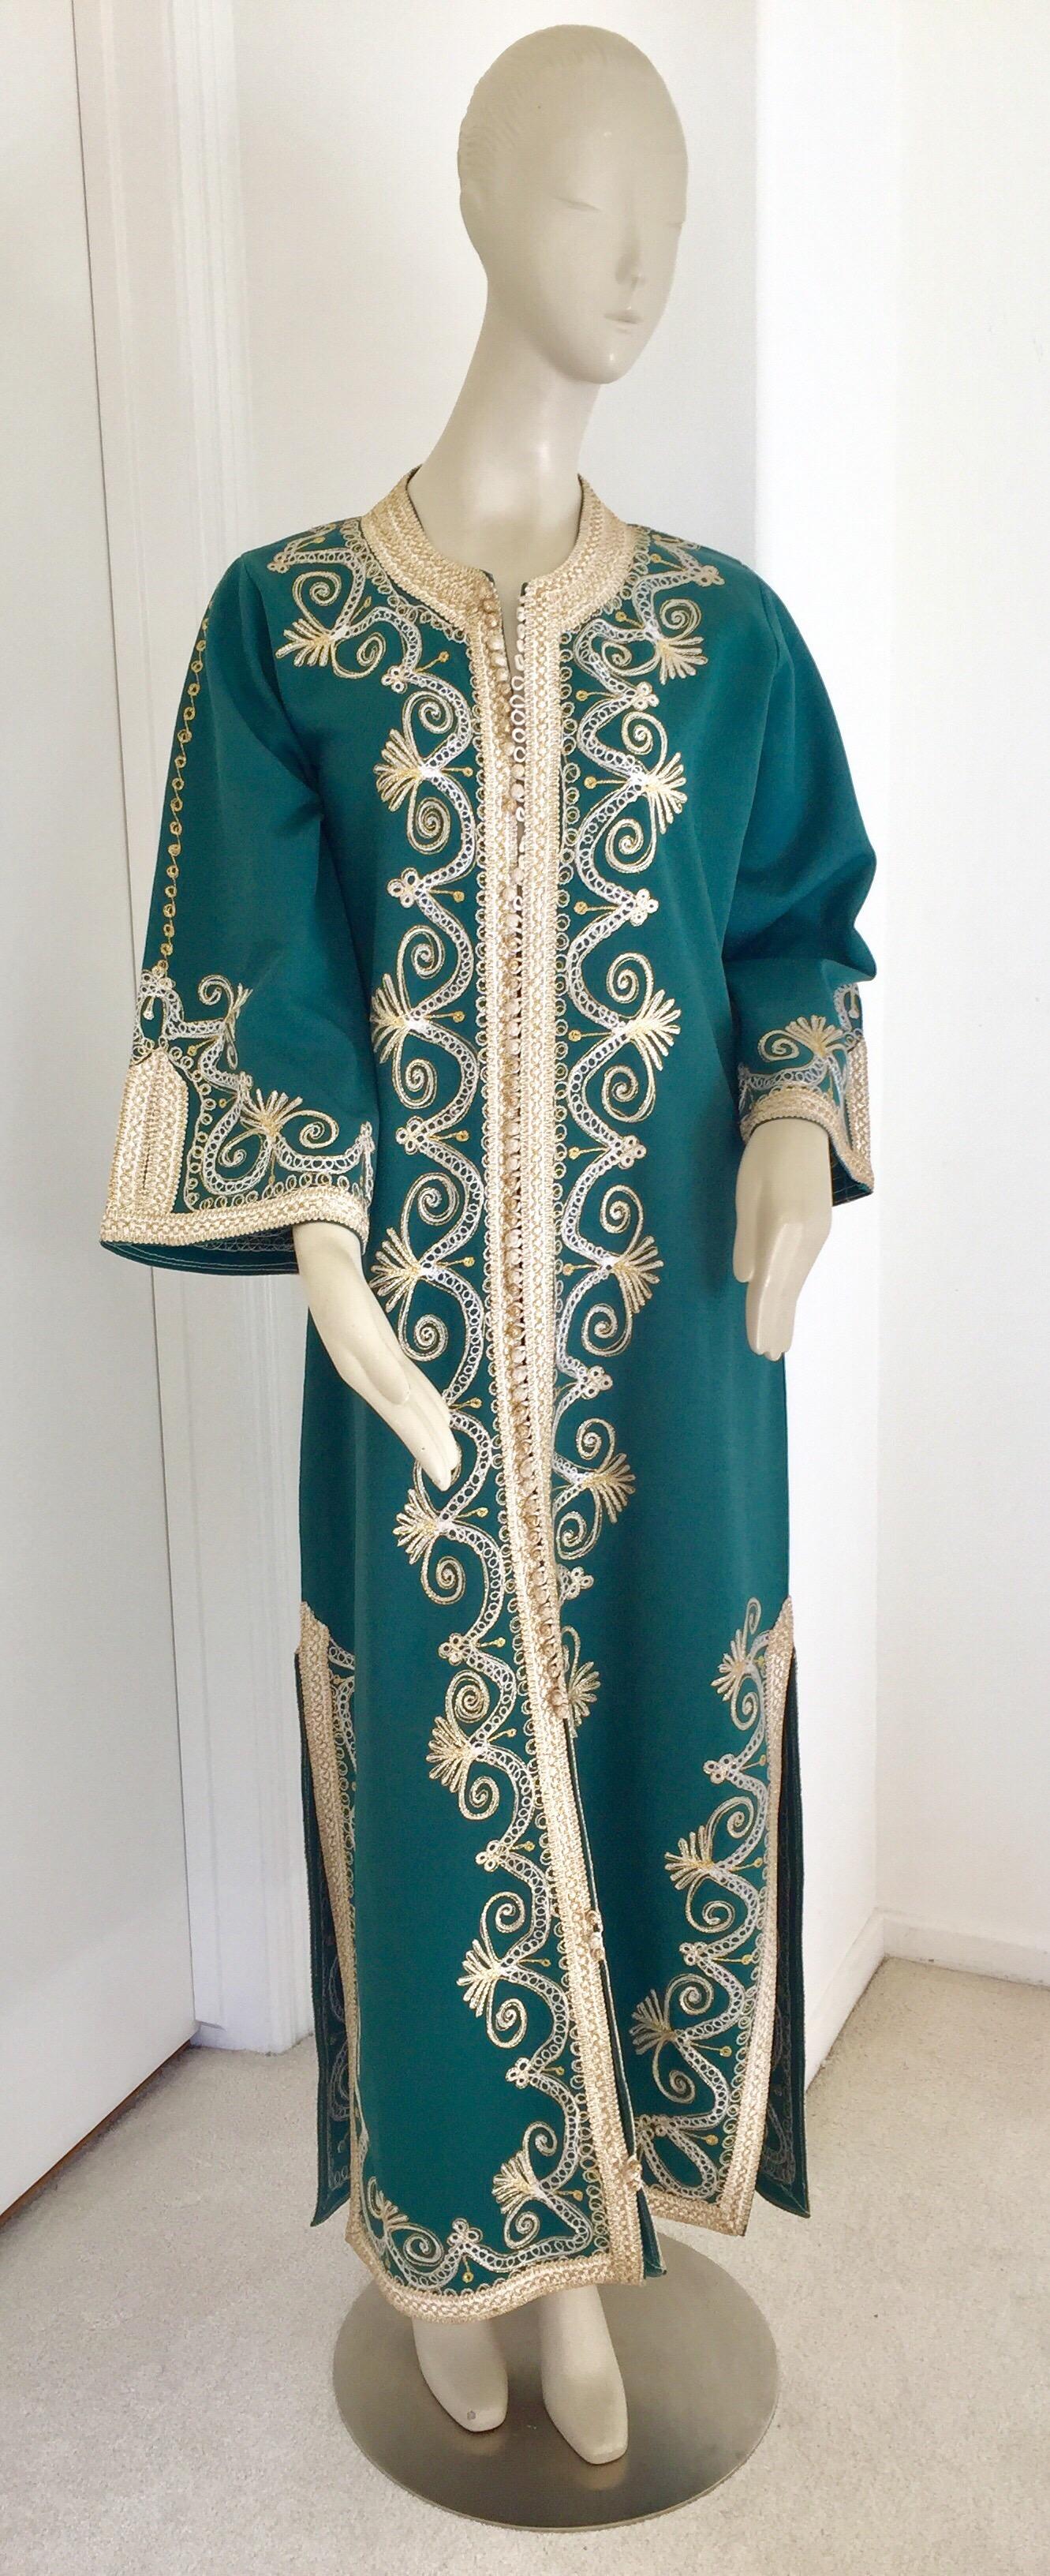 Elegant vintage Moroccan green caftan, poly jersey embroidered with black and gold threads design all-over. 
You could wear this maxi dress kaftan closed or open. 
The kaftan features a traditional neckline, with side slits and gently fluted